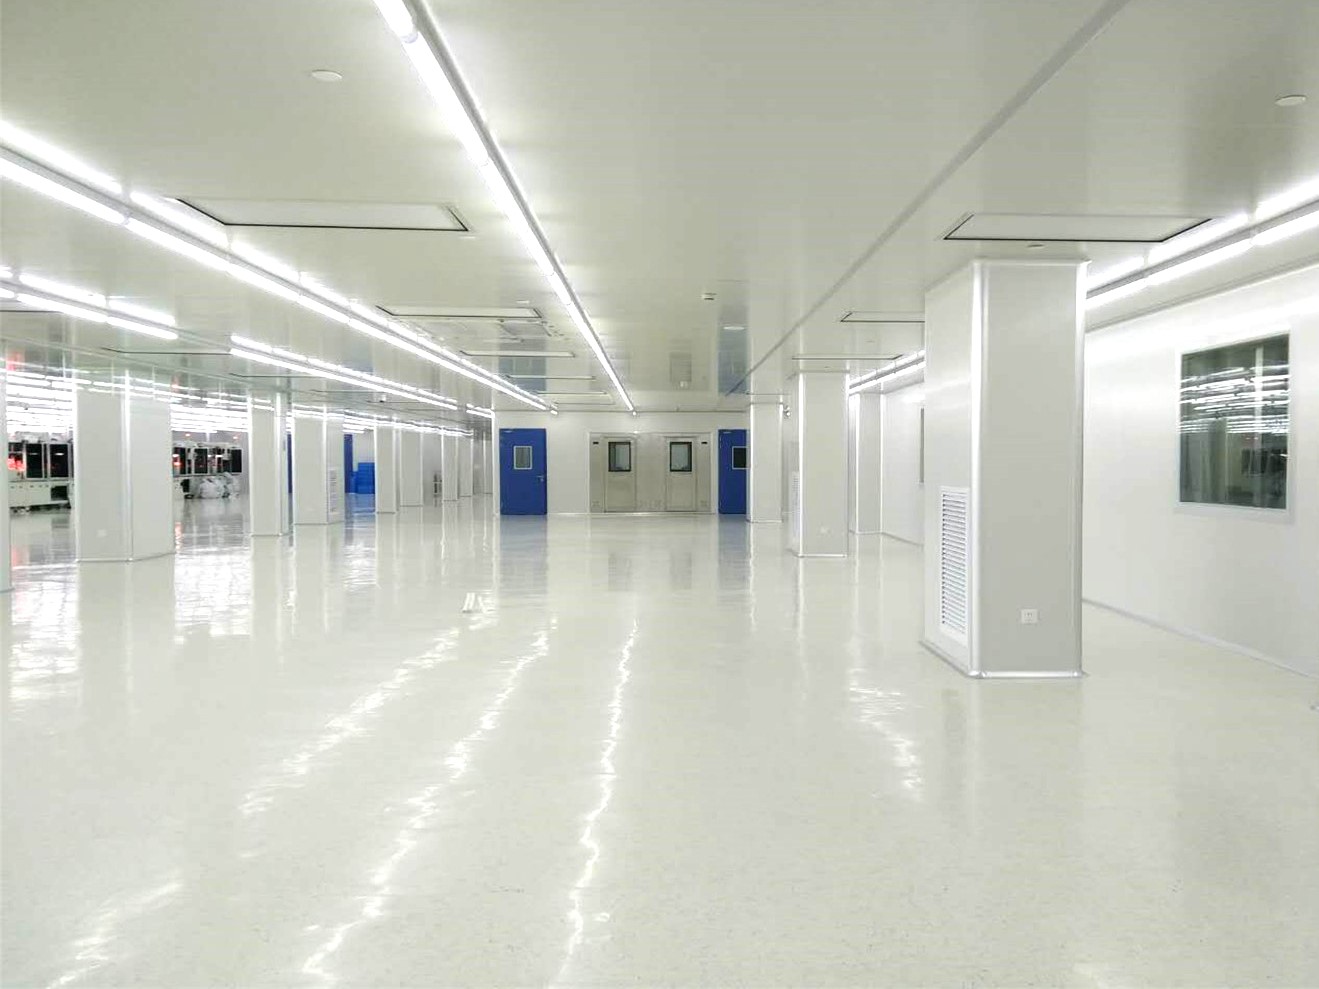 ELECTRONIC CLEAN ROOM DESIGN REQUIREMENT